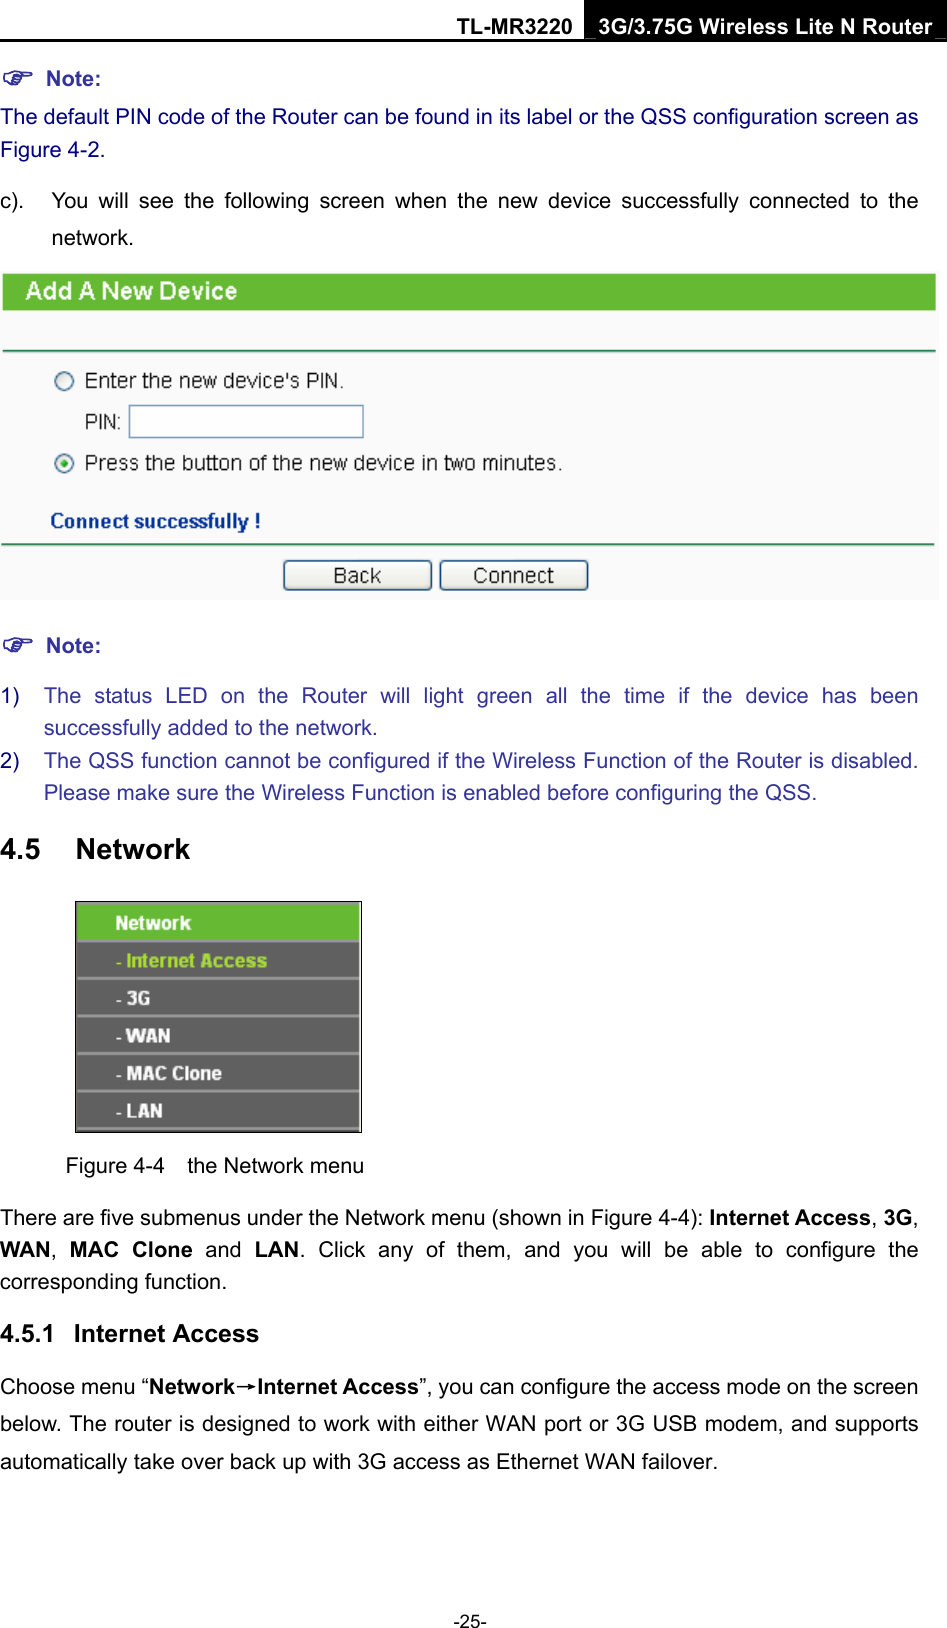 TL-MR3220 3G/3.75G Wireless Lite N Router -25- ) Note: The default PIN code of the Router can be found in its label or the QSS configuration screen as Figure 4-2. c).  You will see the following screen when the new device successfully connected to the network.  ) Note: 1)  The status LED on the Router will light green all the time if the device has been successfully added to the network. 2)  The QSS function cannot be configured if the Wireless Function of the Router is disabled. Please make sure the Wireless Function is enabled before configuring the QSS. 4.5  Network  Figure 4-4    the Network menu There are five submenus under the Network menu (shown in Figure 4-4): Internet Access, 3G, WAN,  MAC Clone and LAN. Click any of them, and you will be able to configure the corresponding function.   4.5.1  Internet Access Choose menu “Network→Internet Access”, you can configure the access mode on the screen below. The router is designed to work with either WAN port or 3G USB modem, and supports automatically take over back up with 3G access as Ethernet WAN failover. 